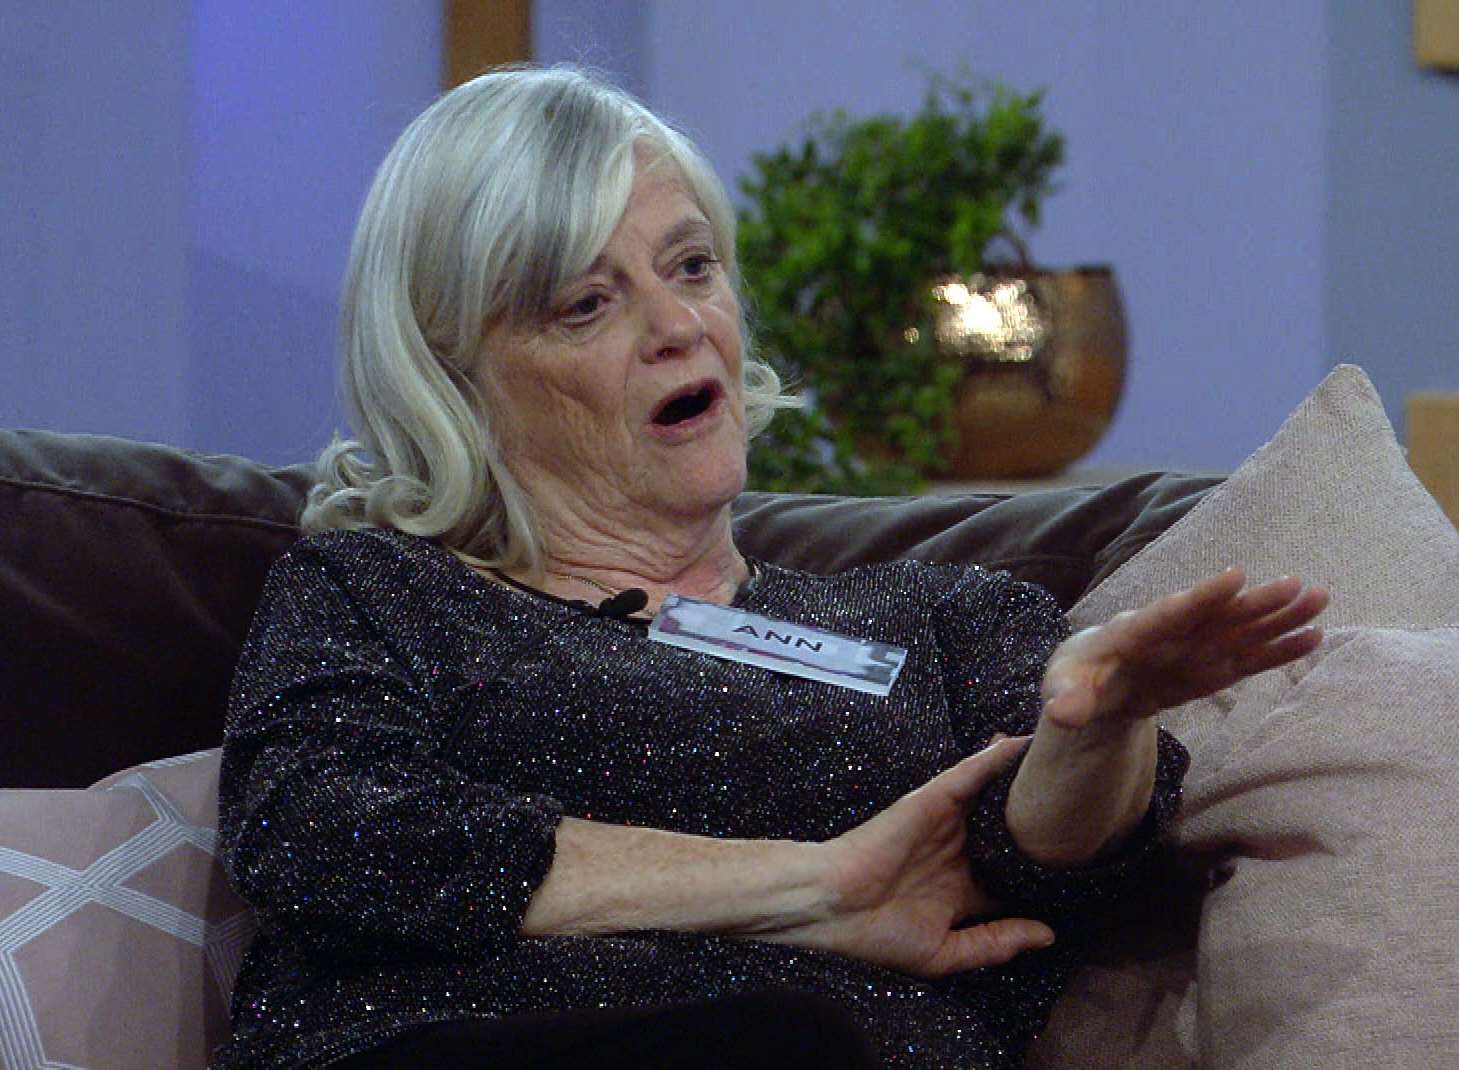 Ann Widdecombe made her opinions clear on Wednesday night's episode of Celebrity Big Brother